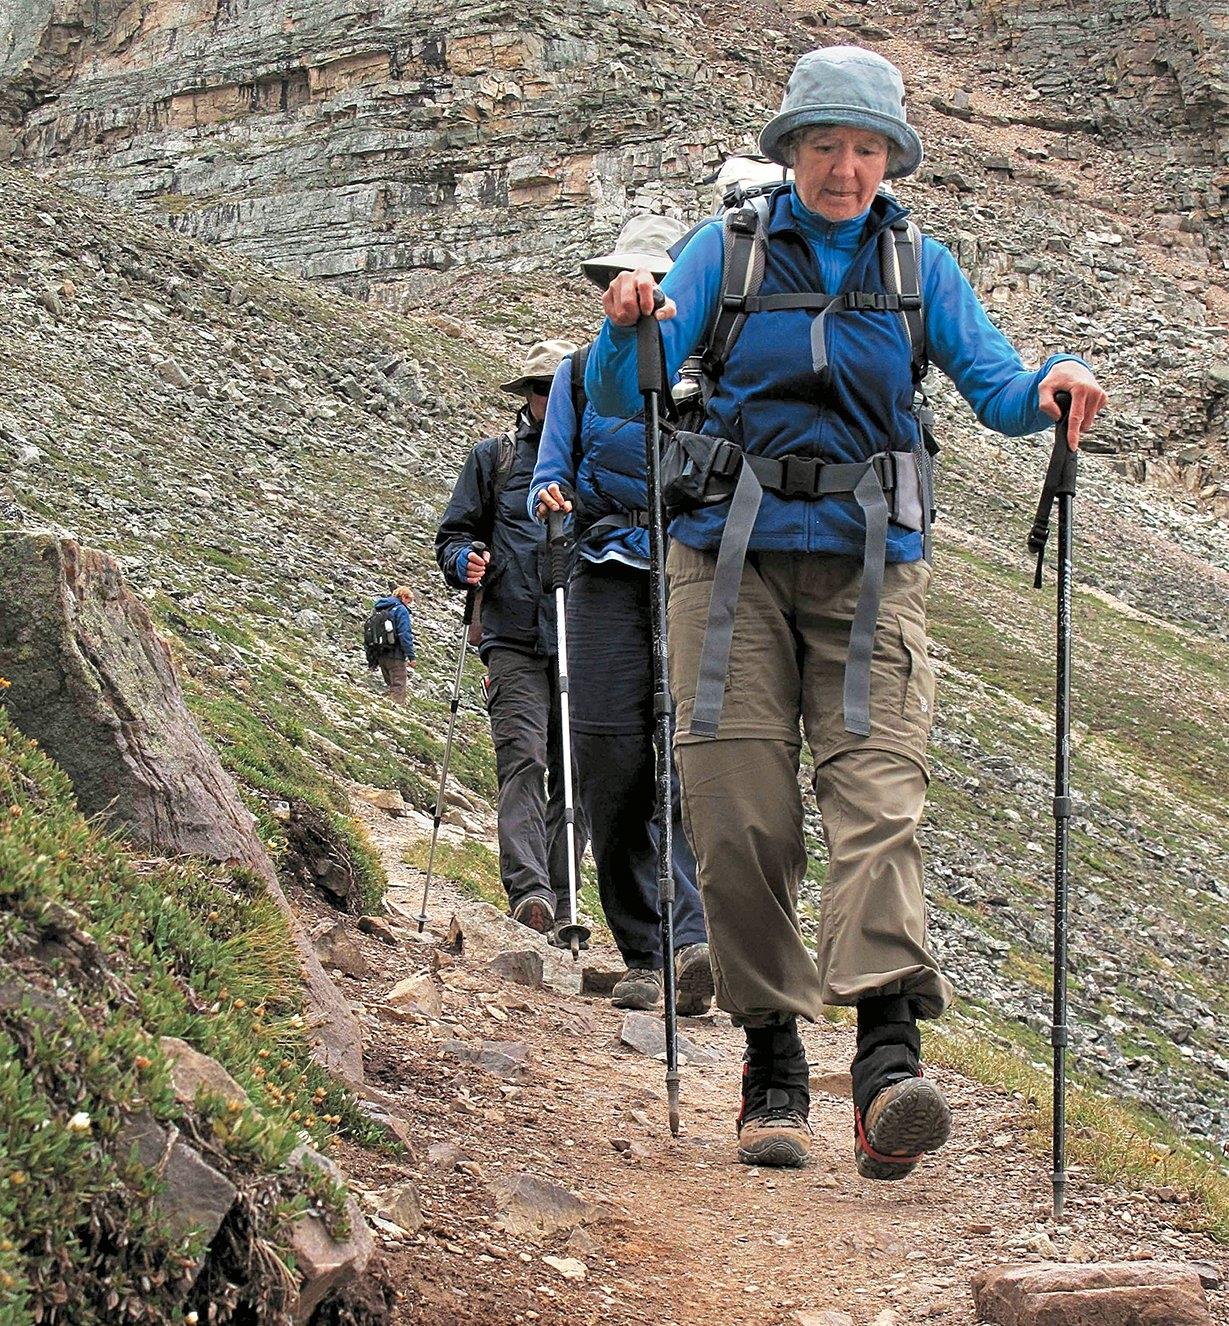 Several people hiking in the mountains with the aid of telescoping hiking sticks